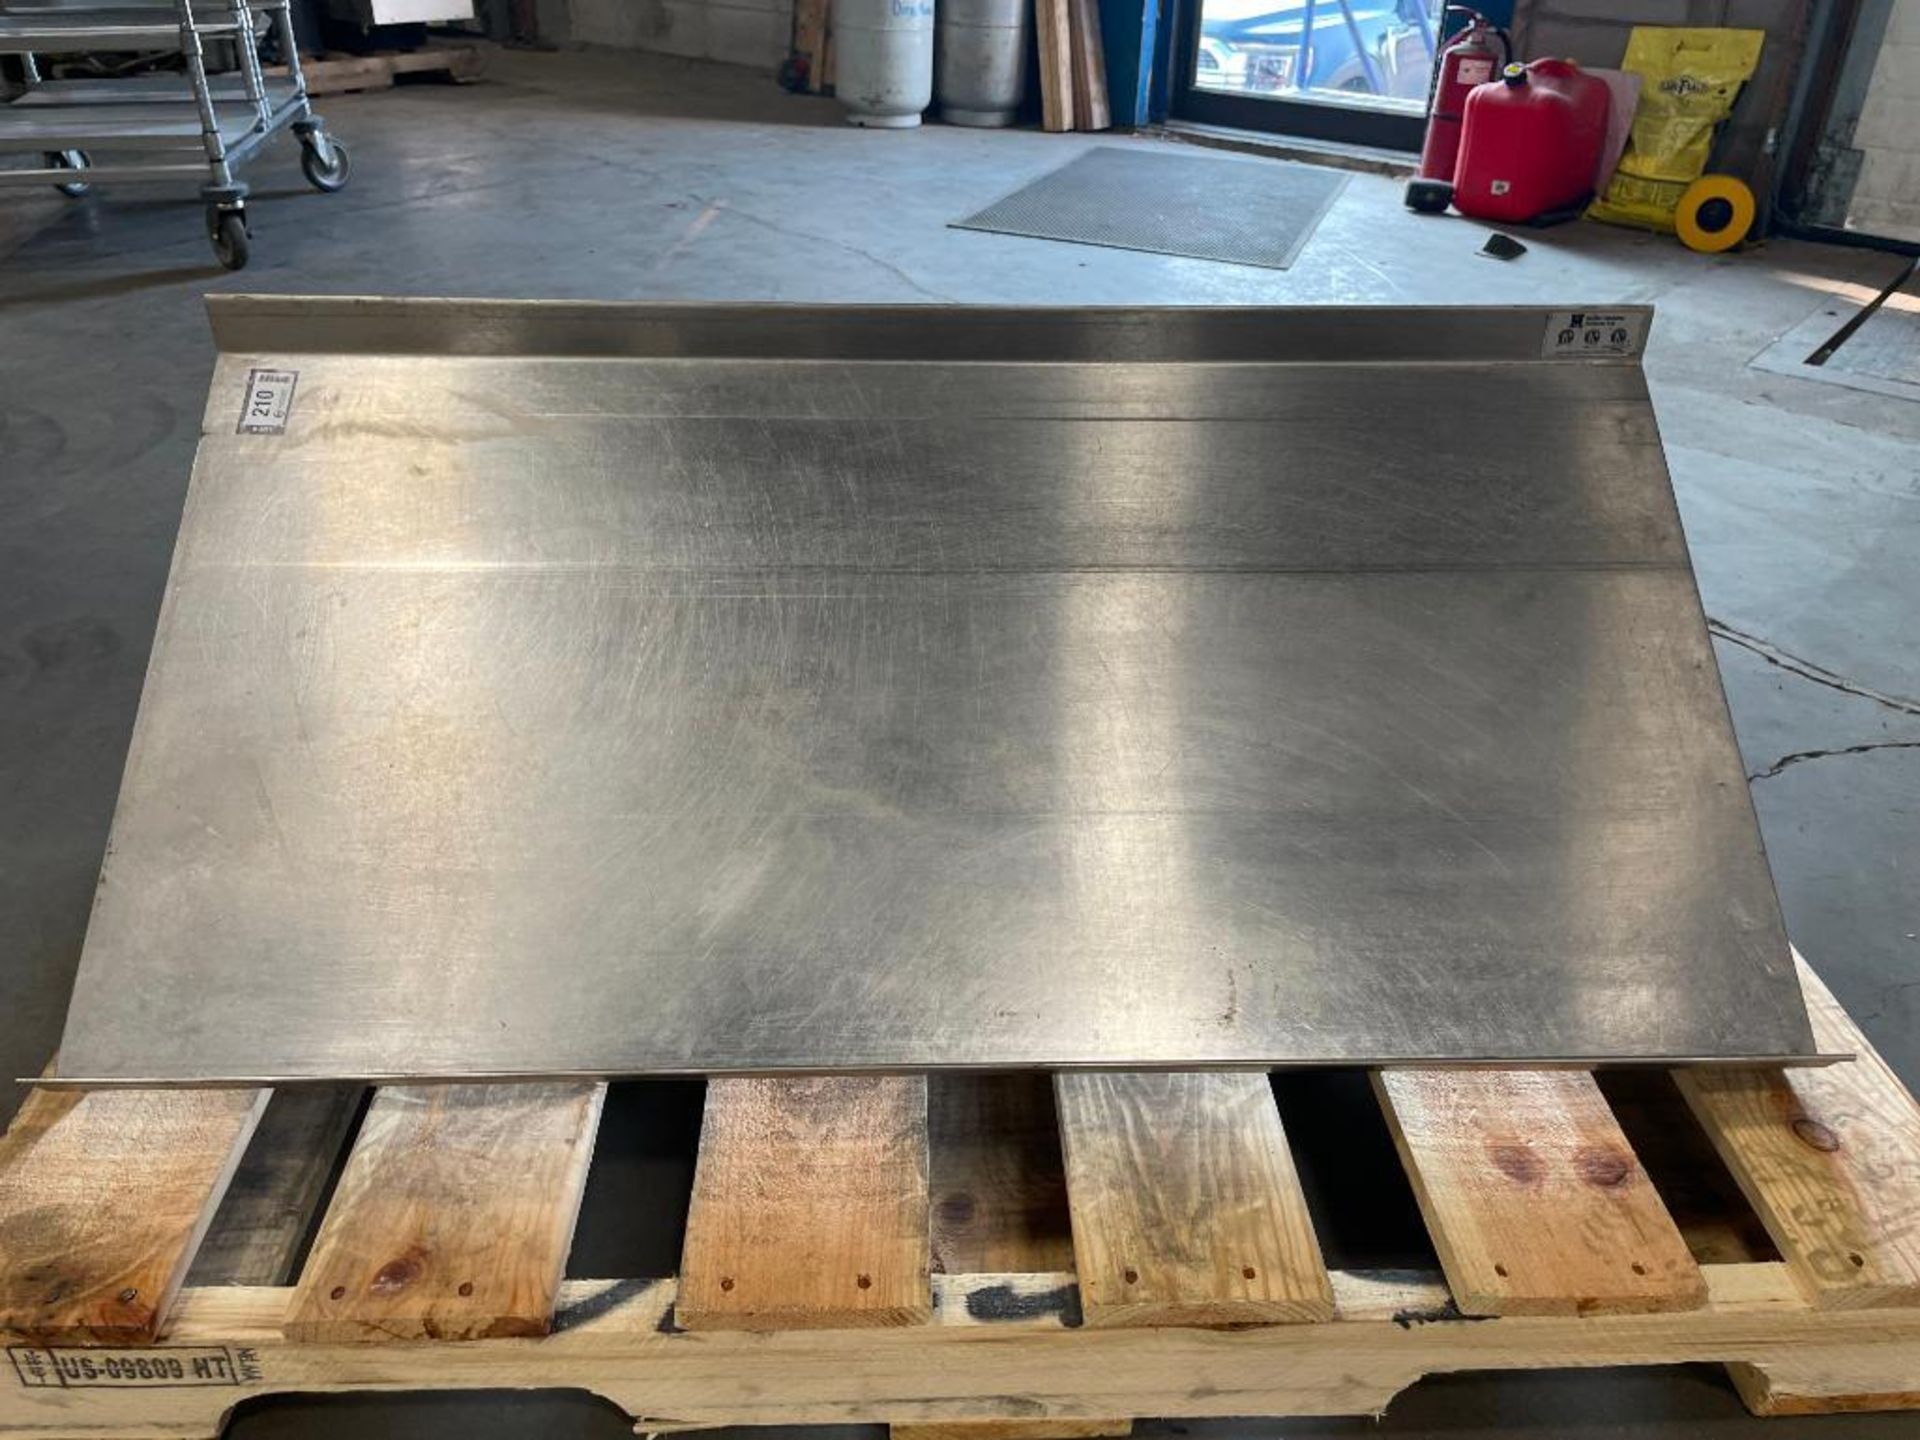 42" X 21" STAINLESS STEEL WALL SHELF - Image 3 of 5